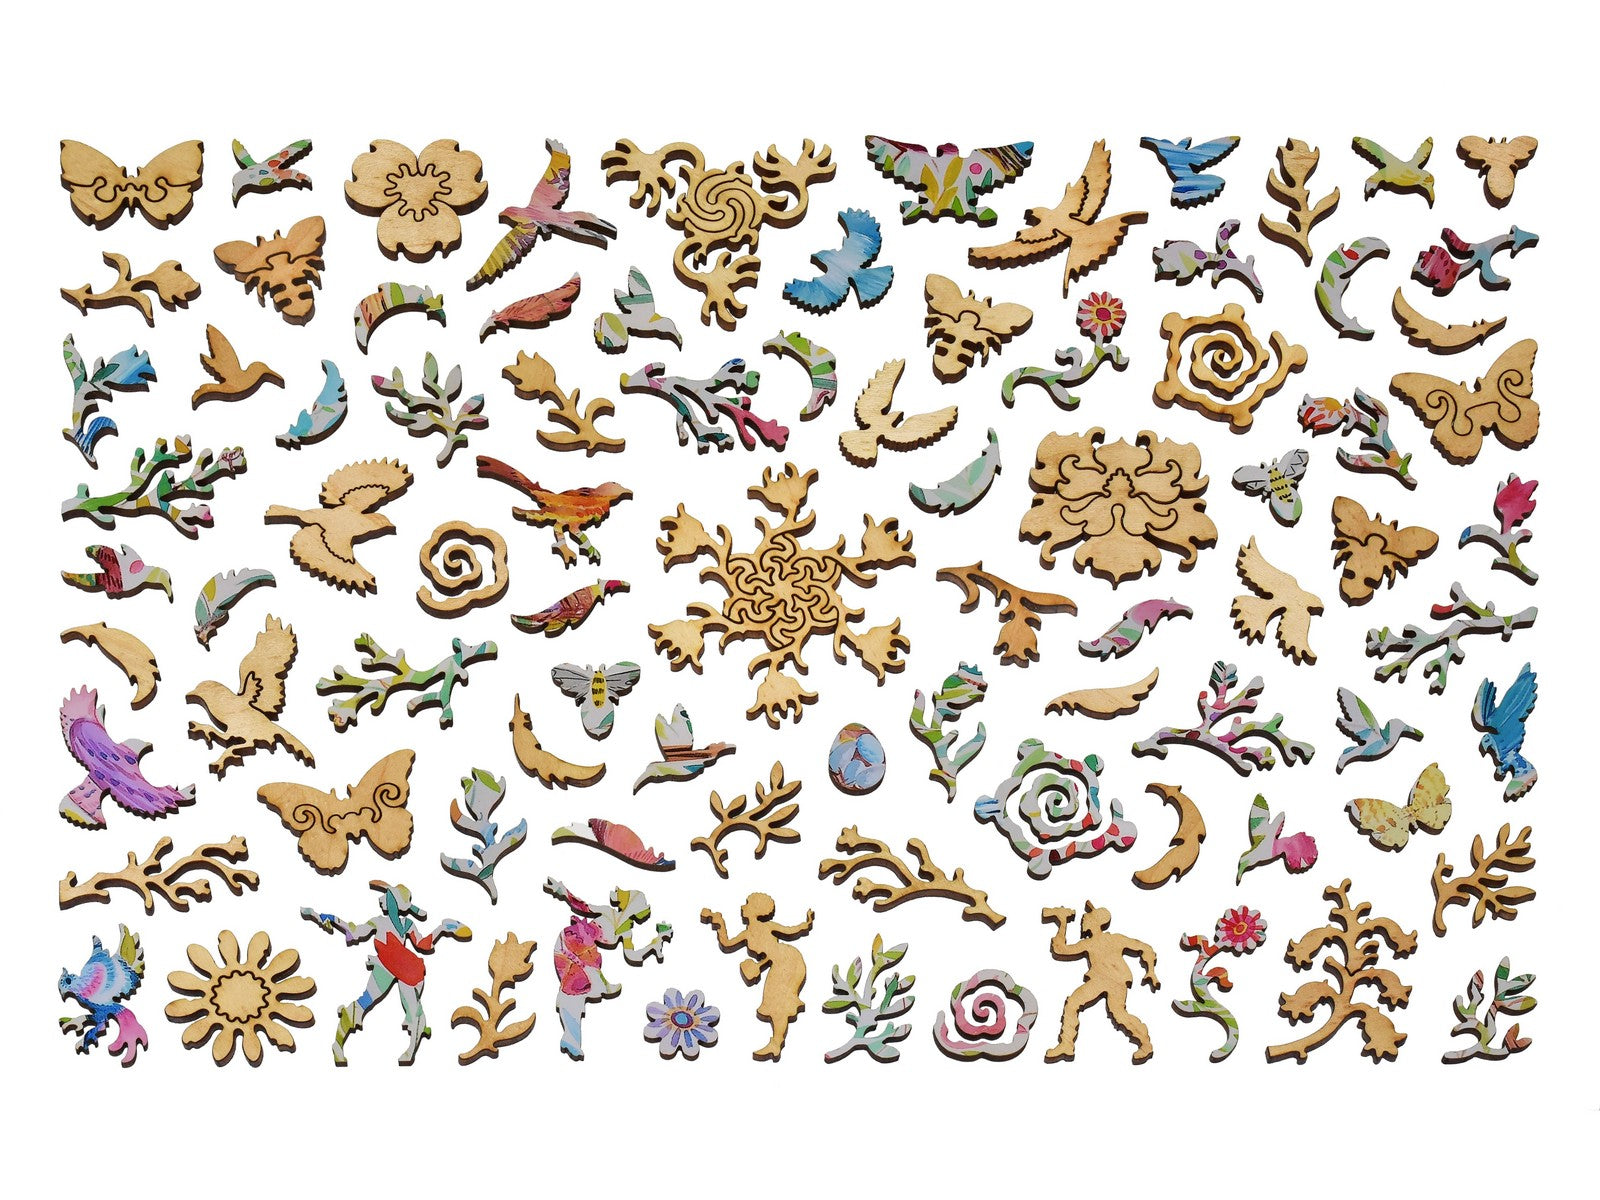 The whimsy pieces that can be found in the puzzle, Birds, Flowers and Eggs.